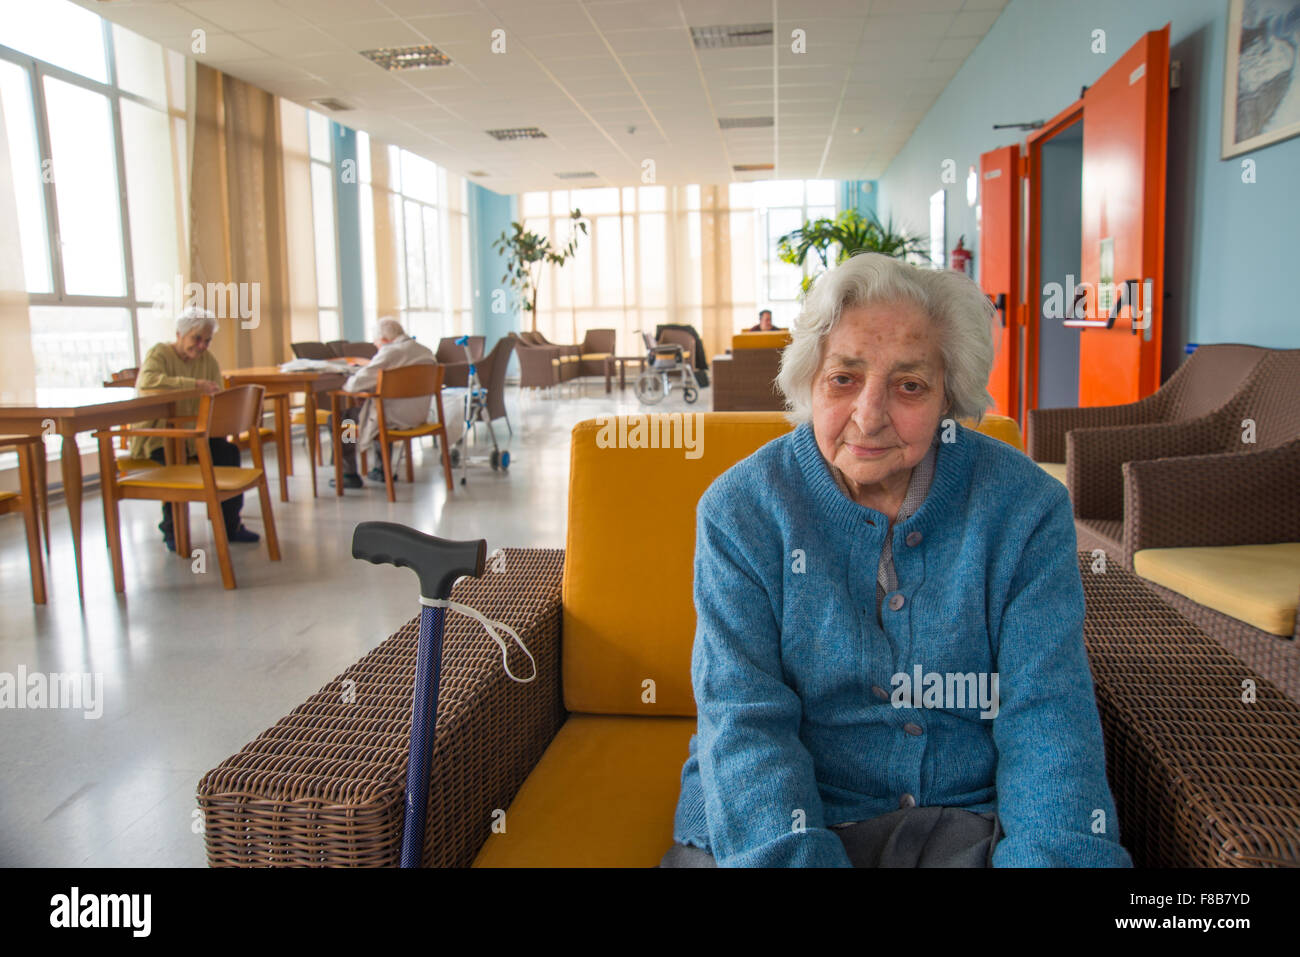 Portrait of old woman in a nursing home, smiling and looking at the camera. Stock Photo